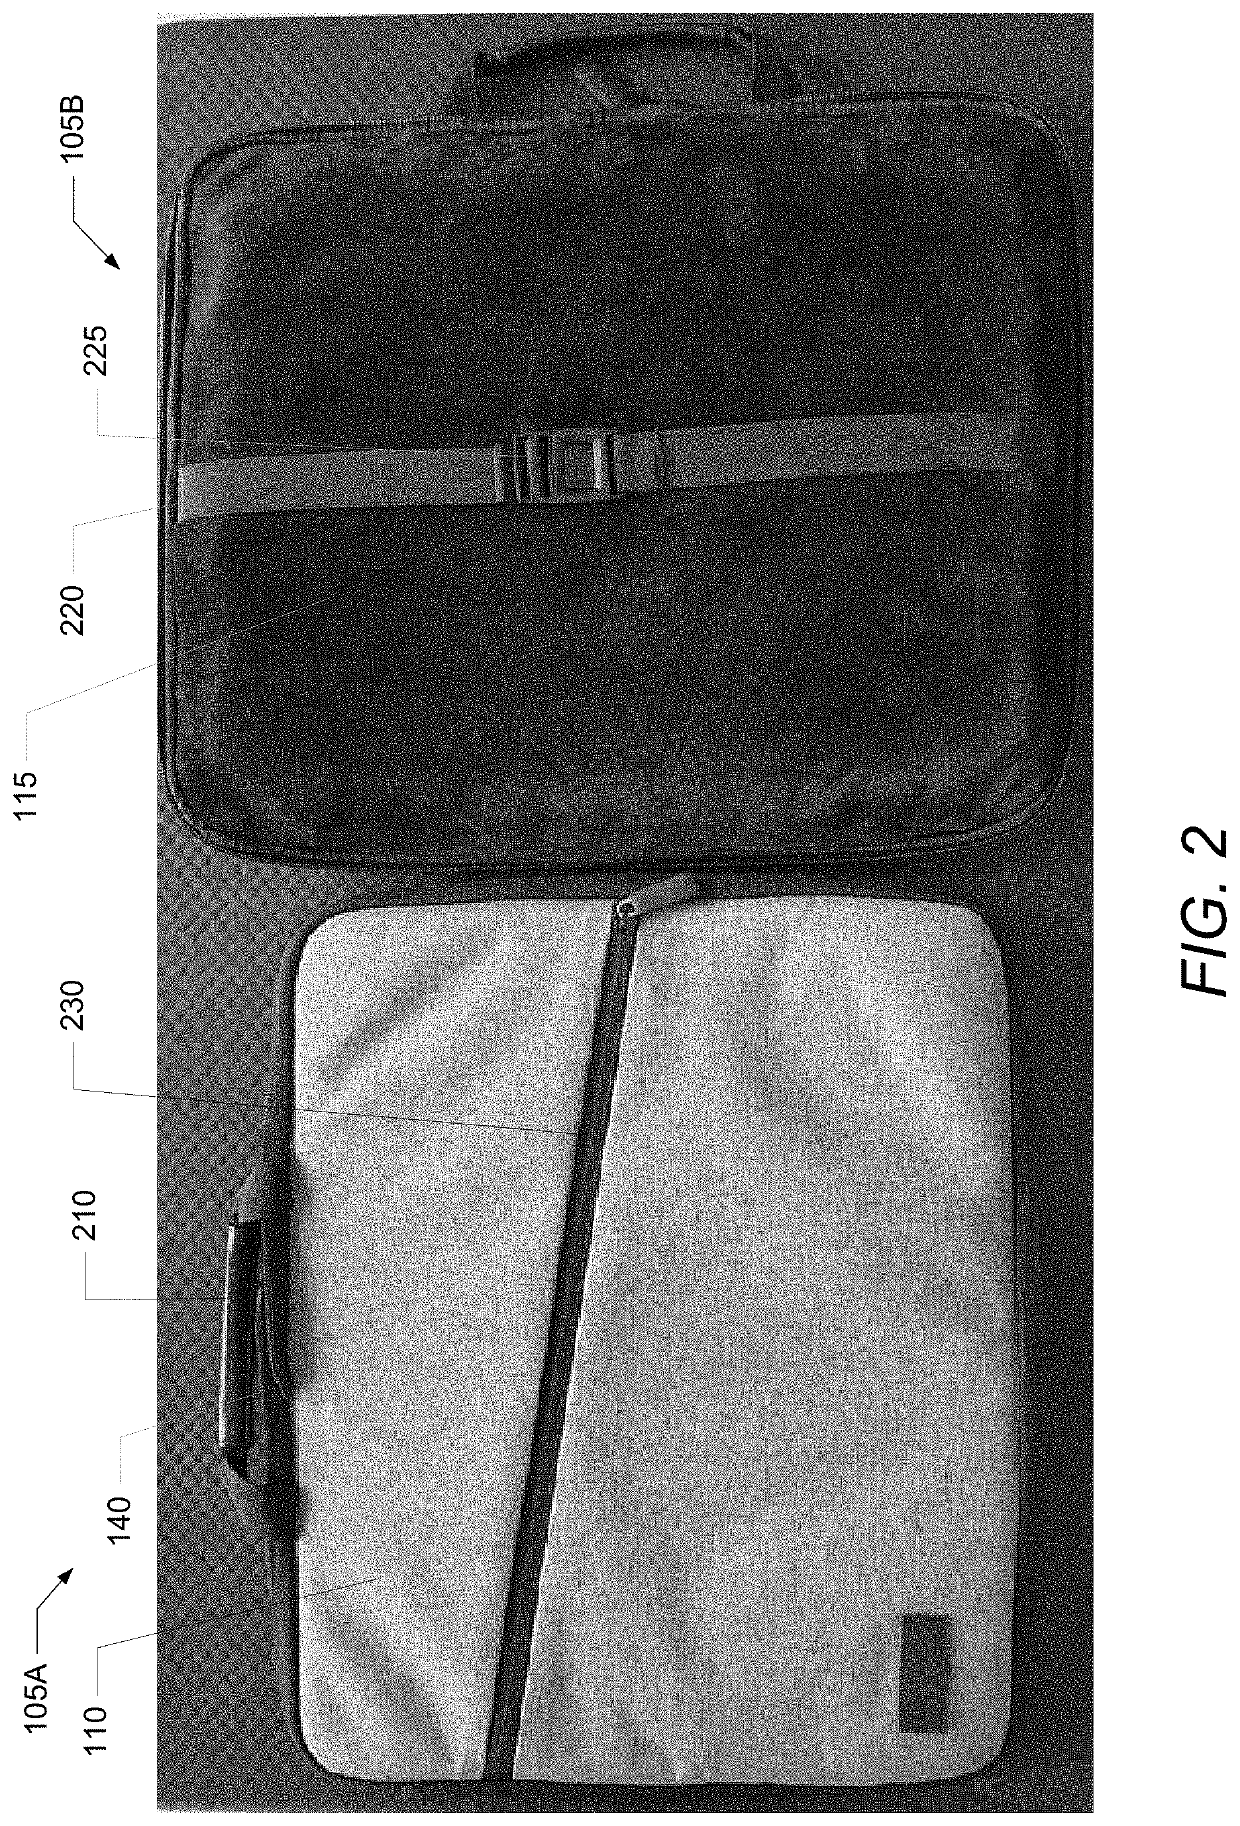 Reconfigurable/convertible personal carry bag for electronic device that doubles as seat cushions, back rests, and/or lap or desktop cushions